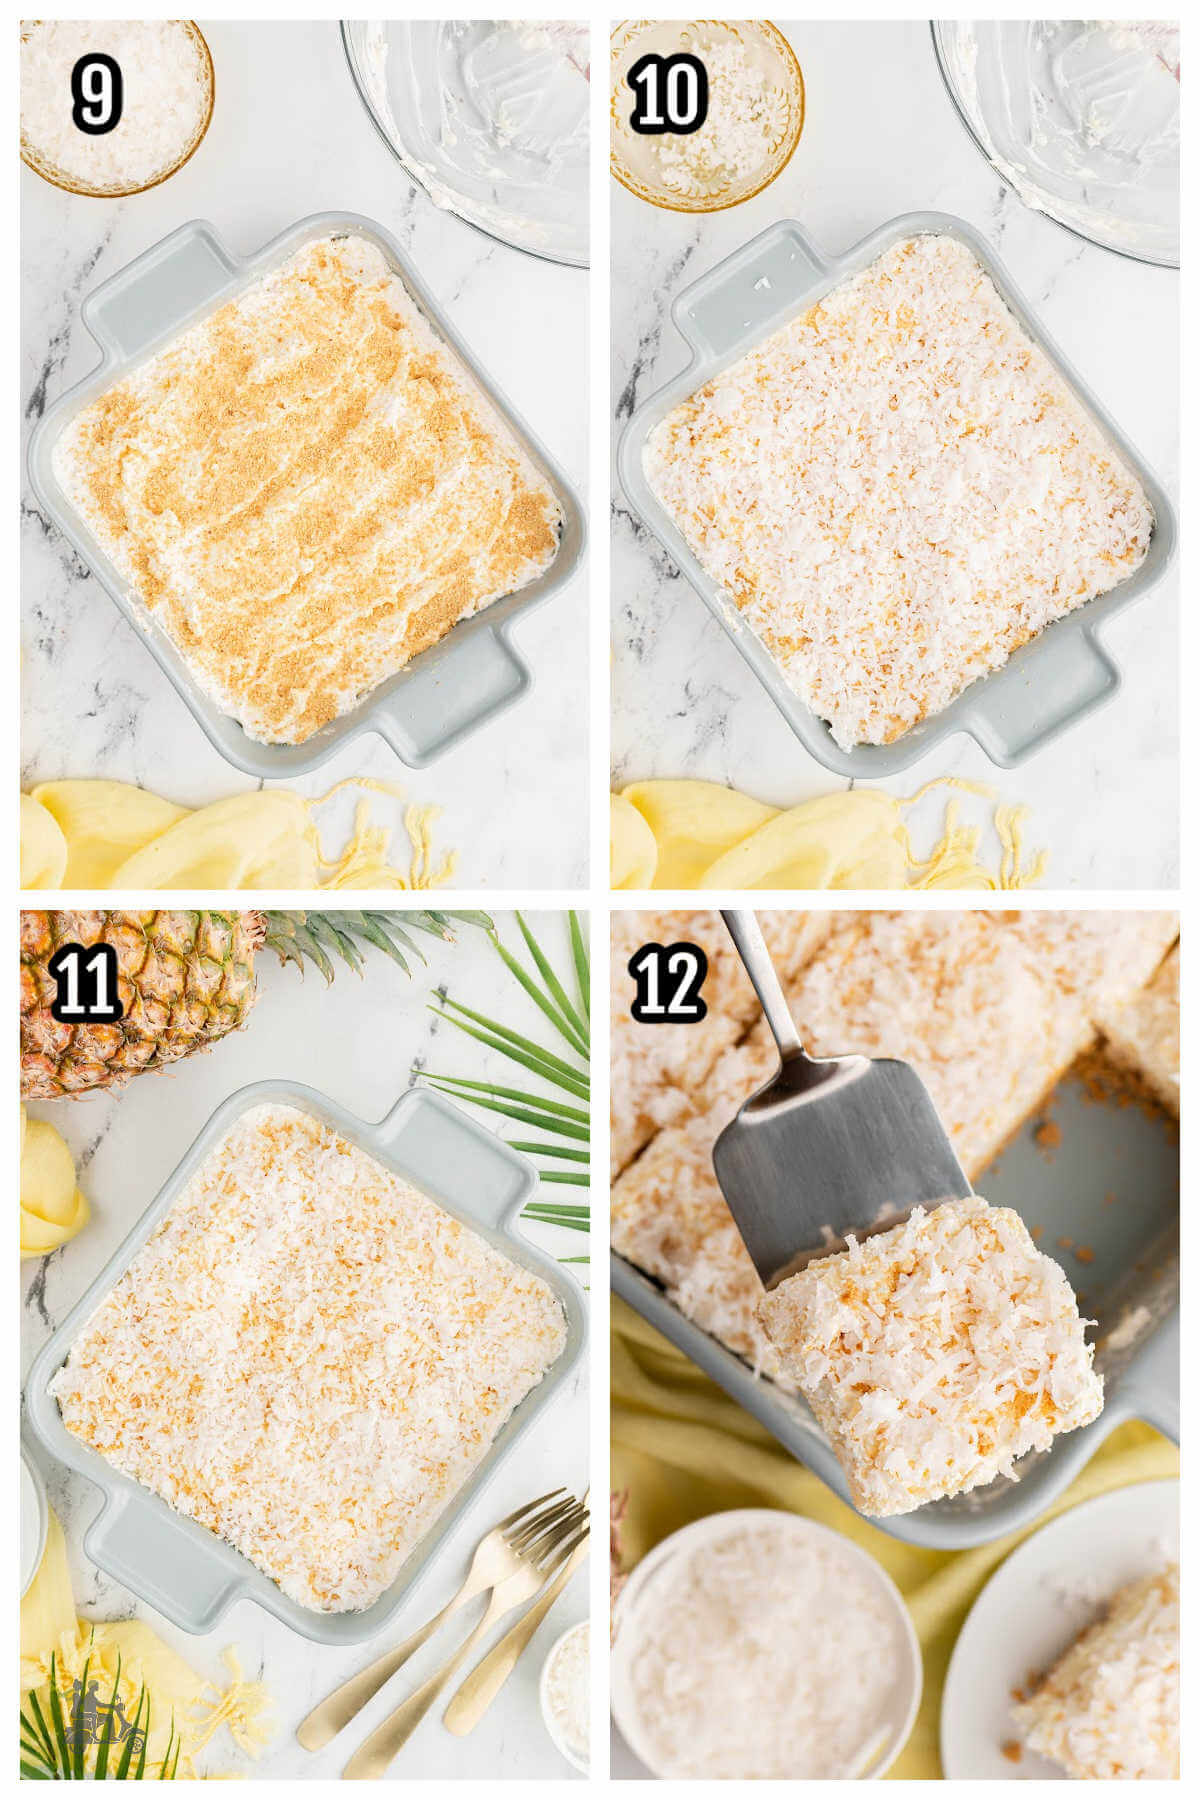 Final four steps for assembling the Toasted coconut pineapple cream cheese dessert. 